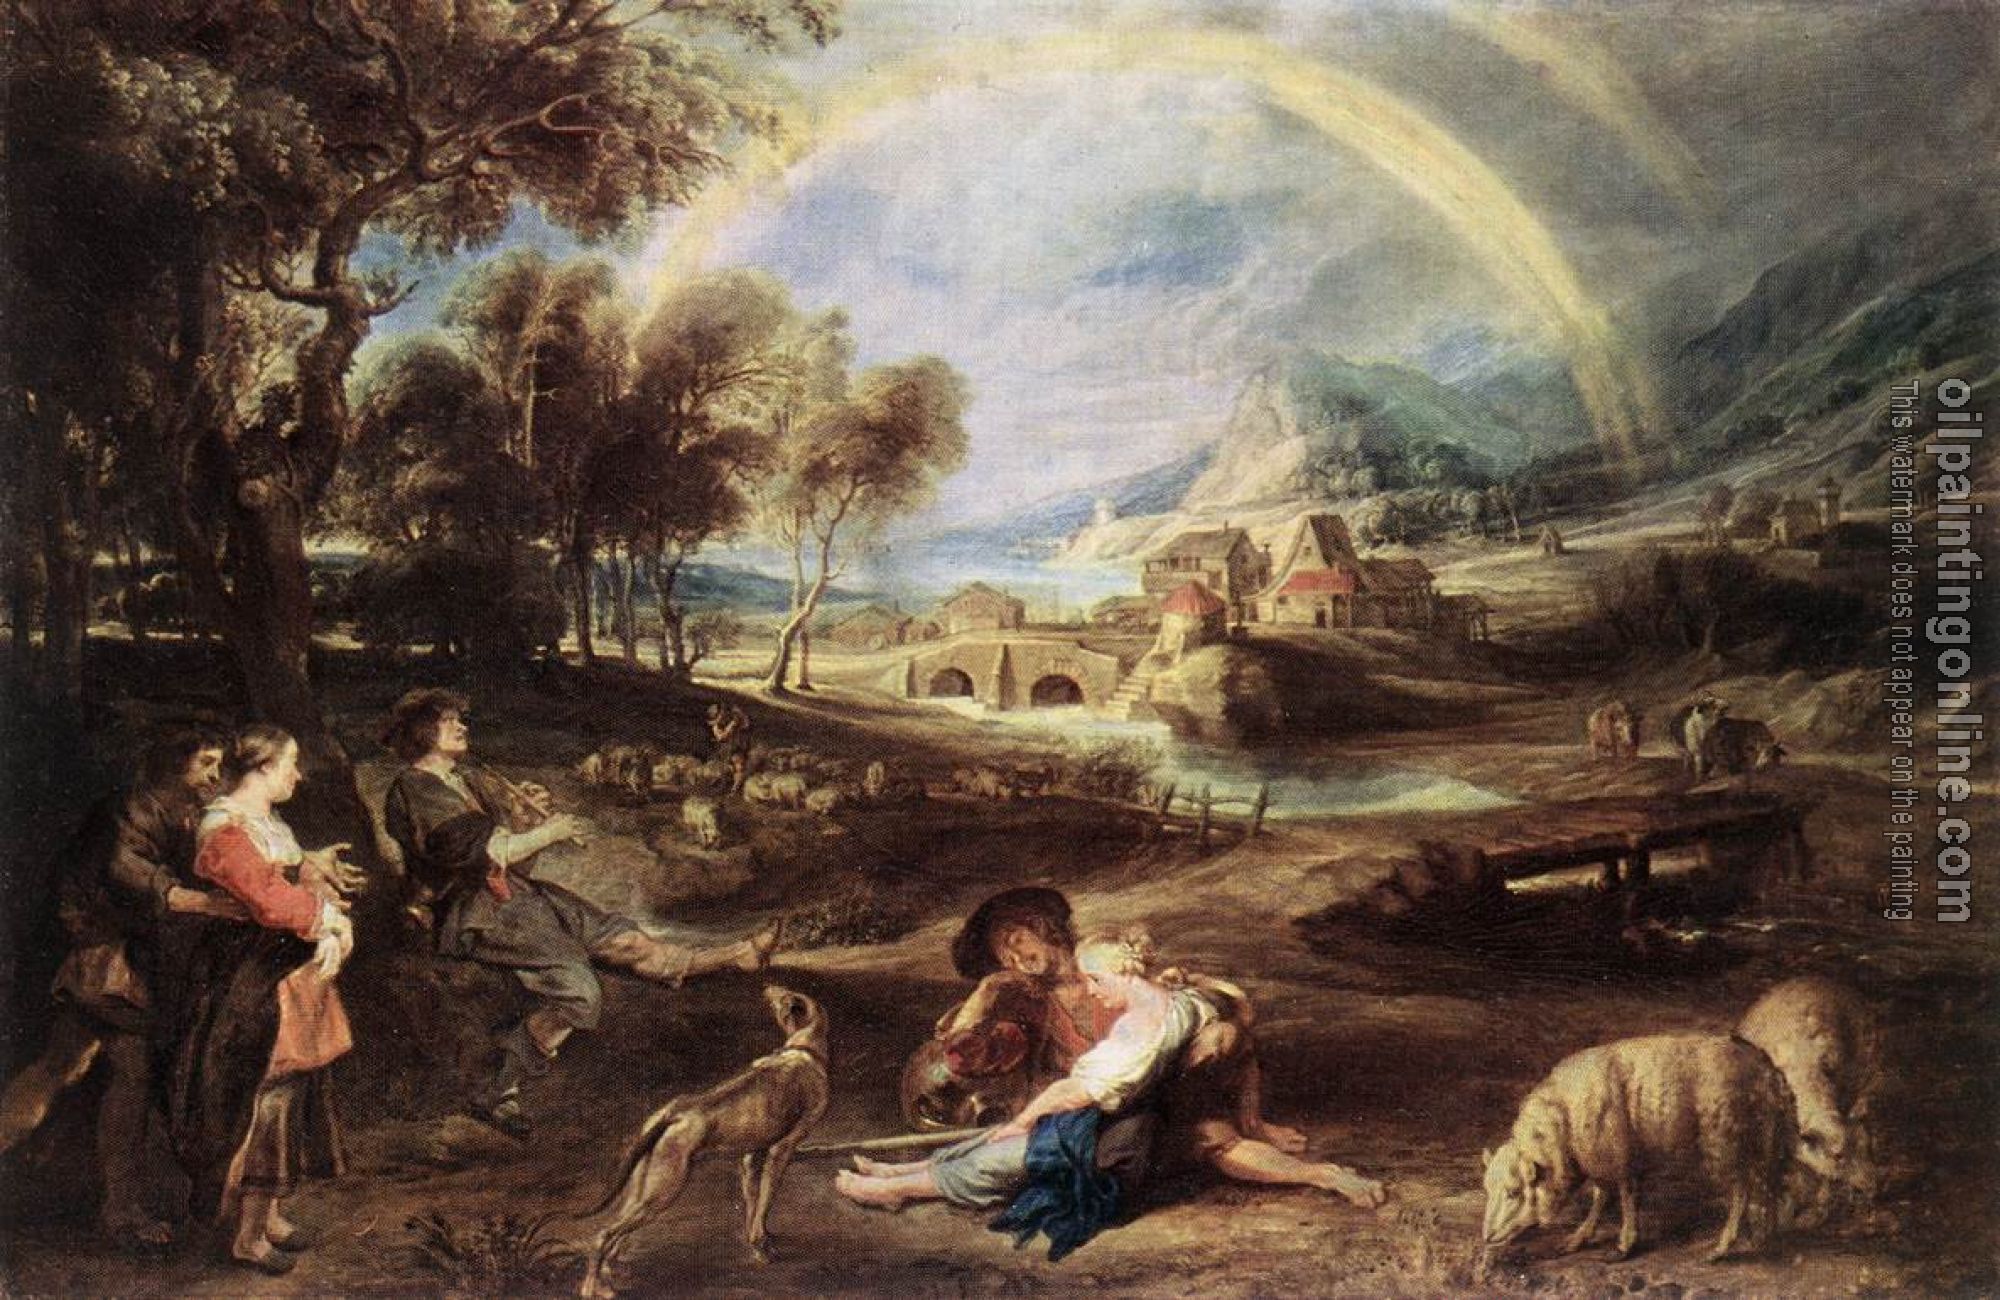 Rubens, Peter Paul - Landscape with a Rainbow